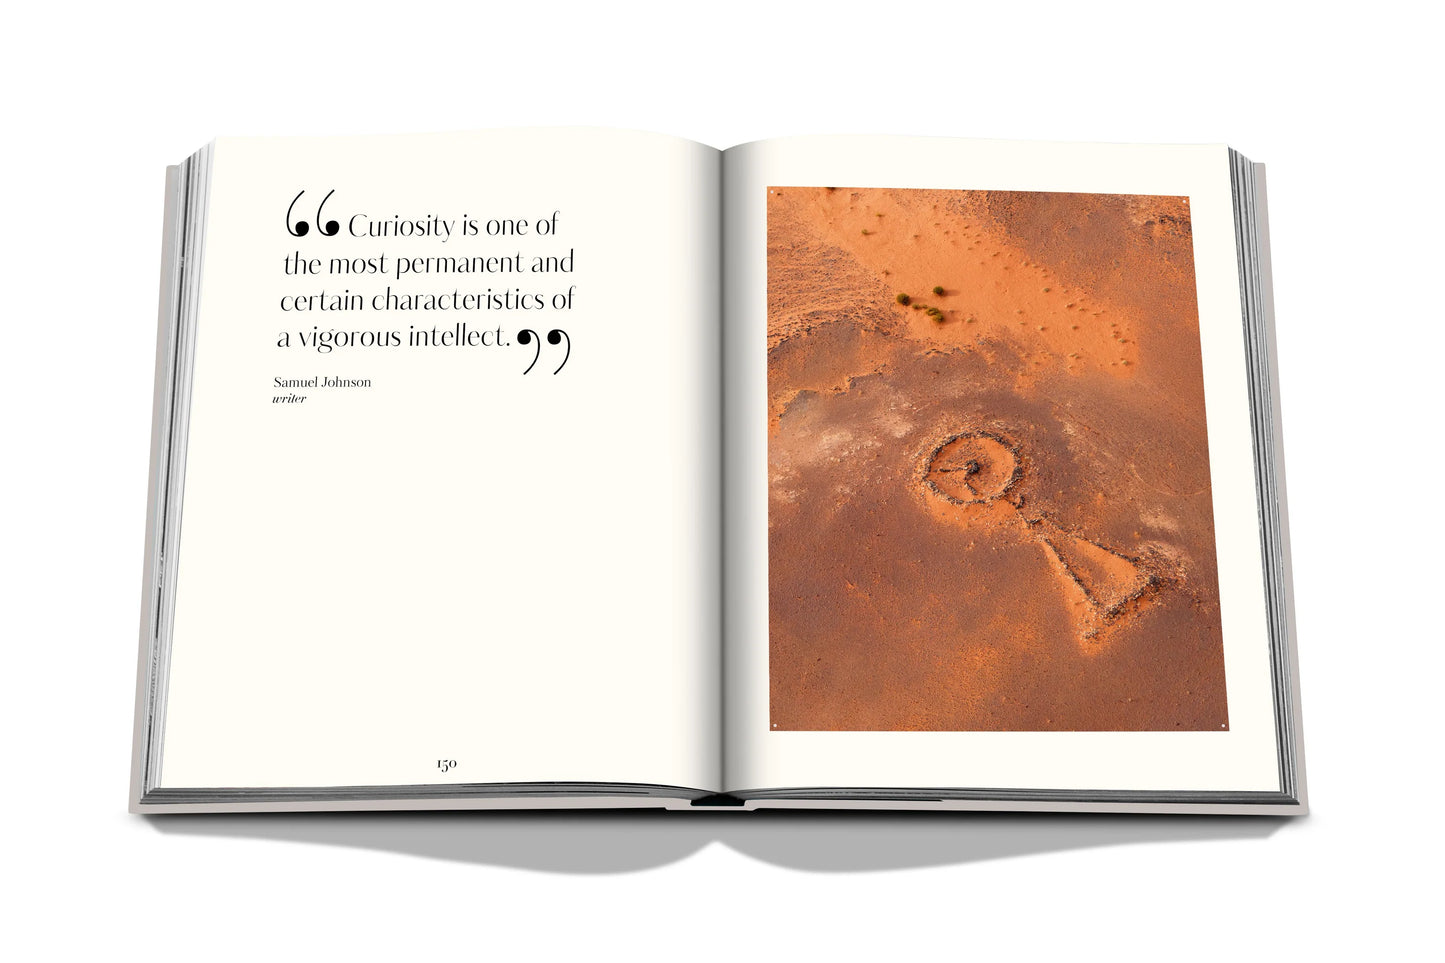 Livre Kites of the Desert - Archaeological Mysteries of Saudi Arabia: Impossible Collection